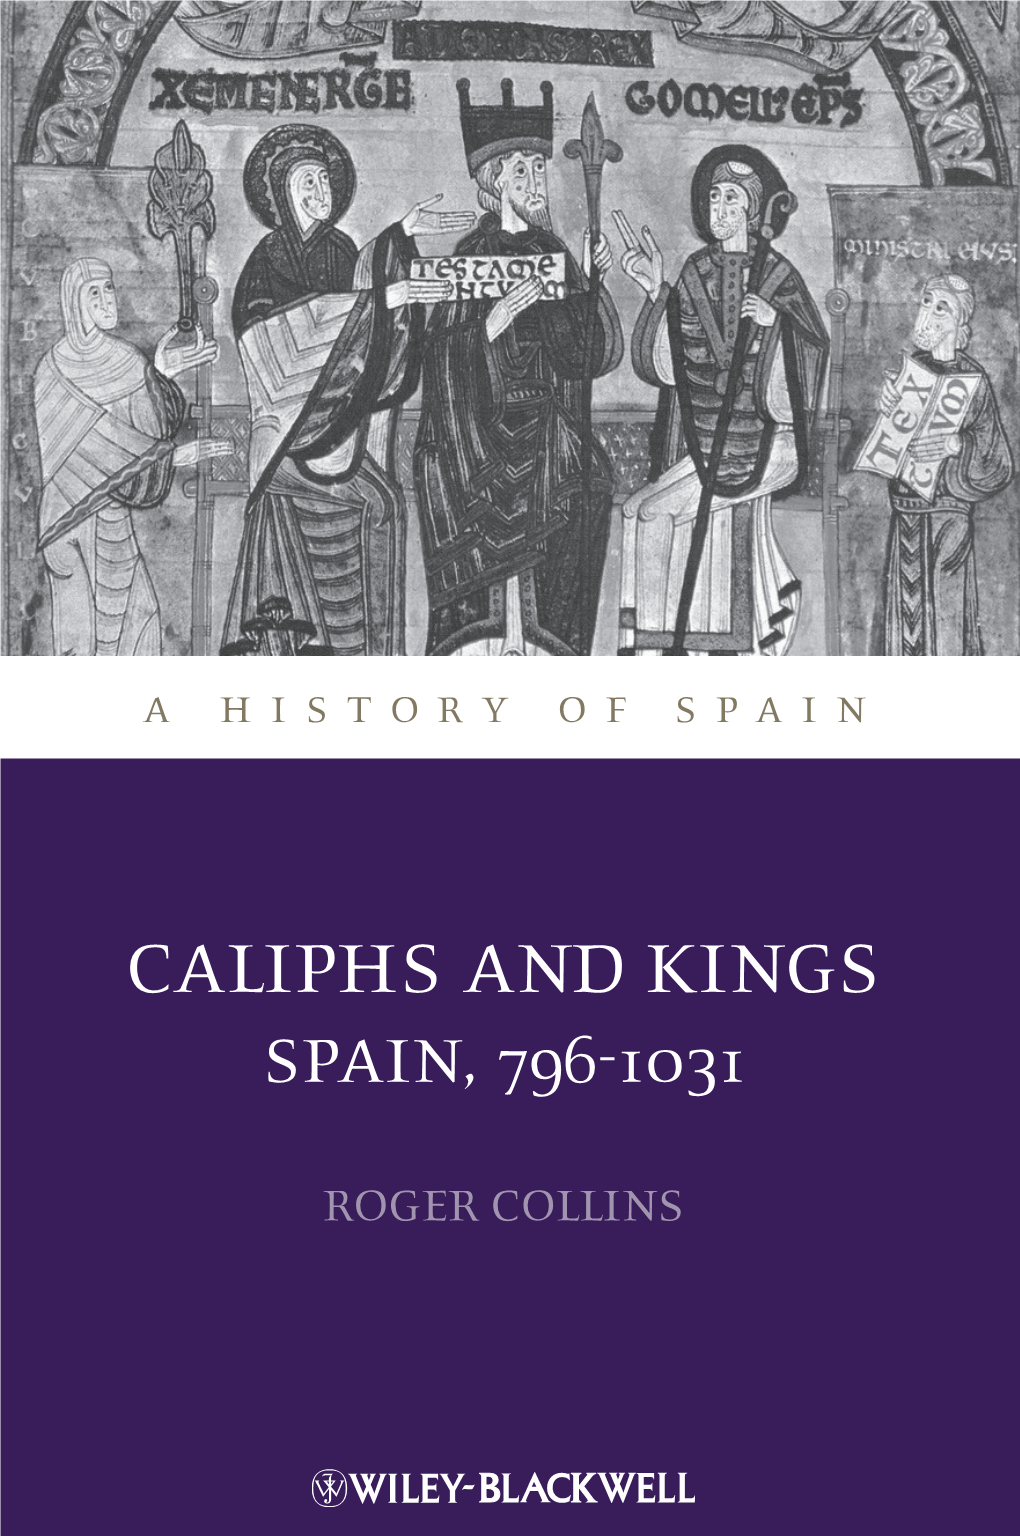 CALIPHS and KINGS Edinburgh, Roger Collins Is Now a Fellow in the SPAIN, 796-1031 School of History, Classics and Archaeology of the University of Edinburgh